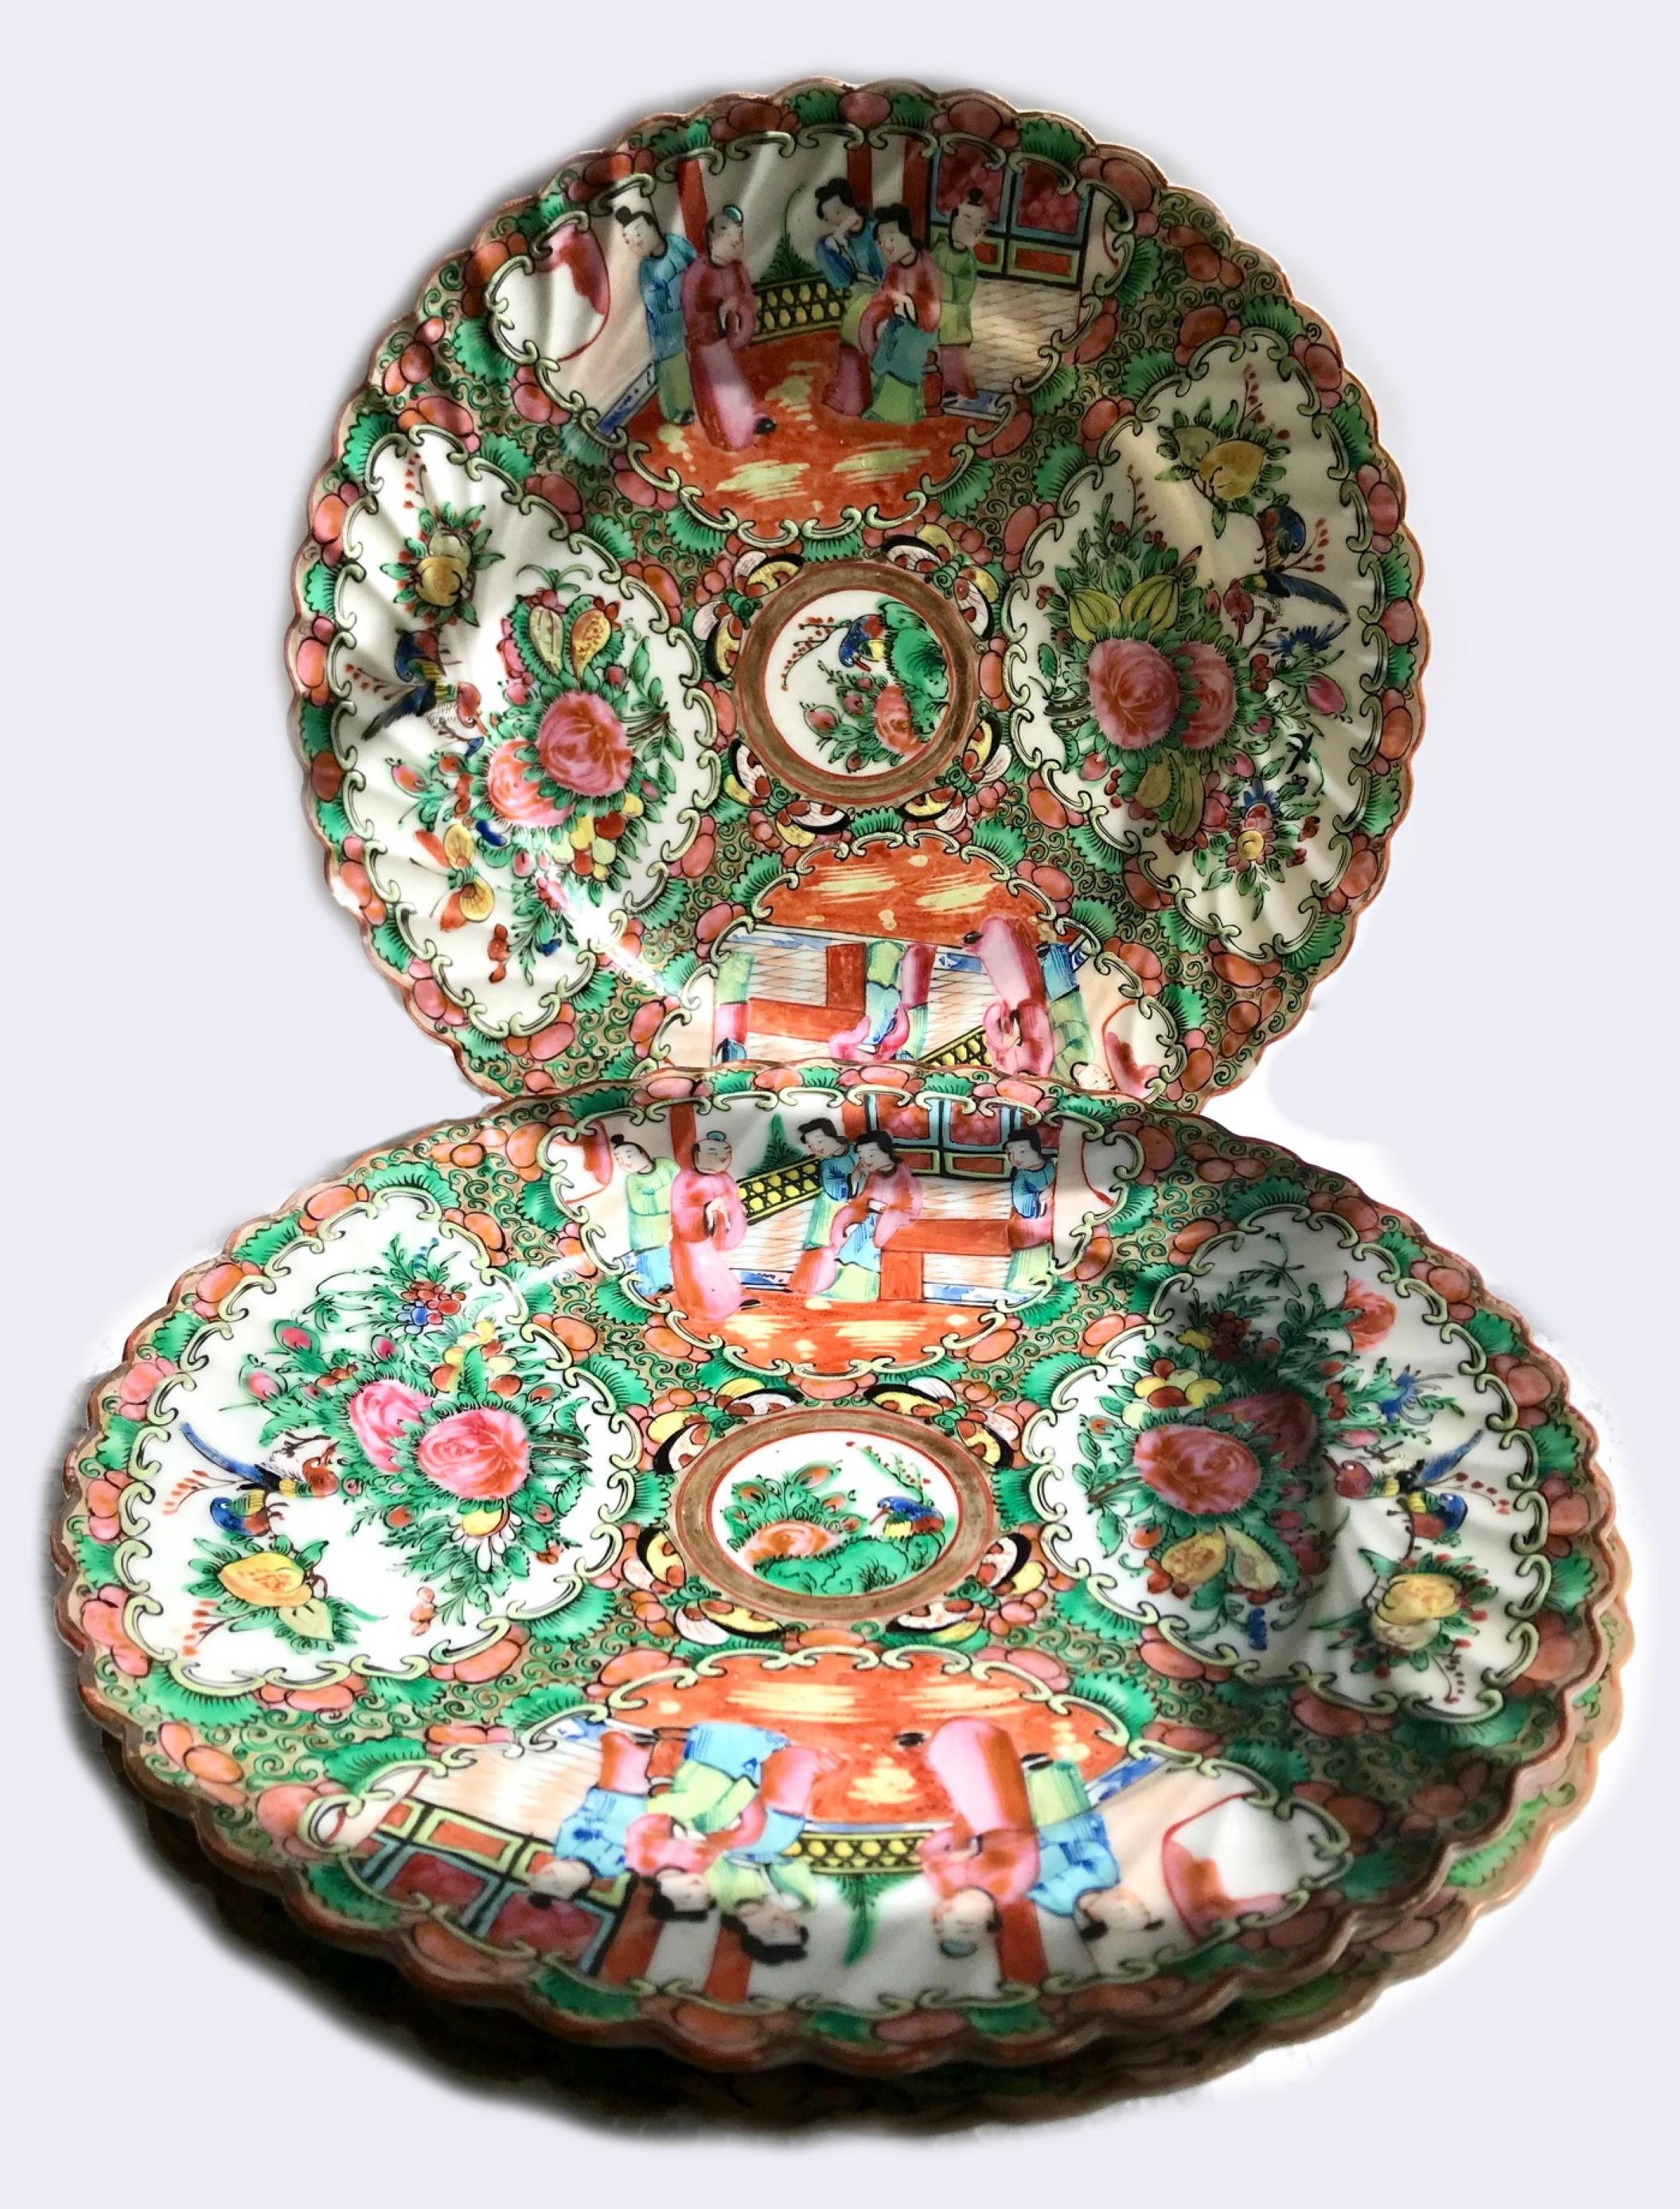 19th century Chinese export rose medallion 3 dinner plates

These beautiful hand enameled plates have the rose medallion canton design with birds, peonies, butterflies, and Mandarin people. The plates are decoratively broken into 4 sections that